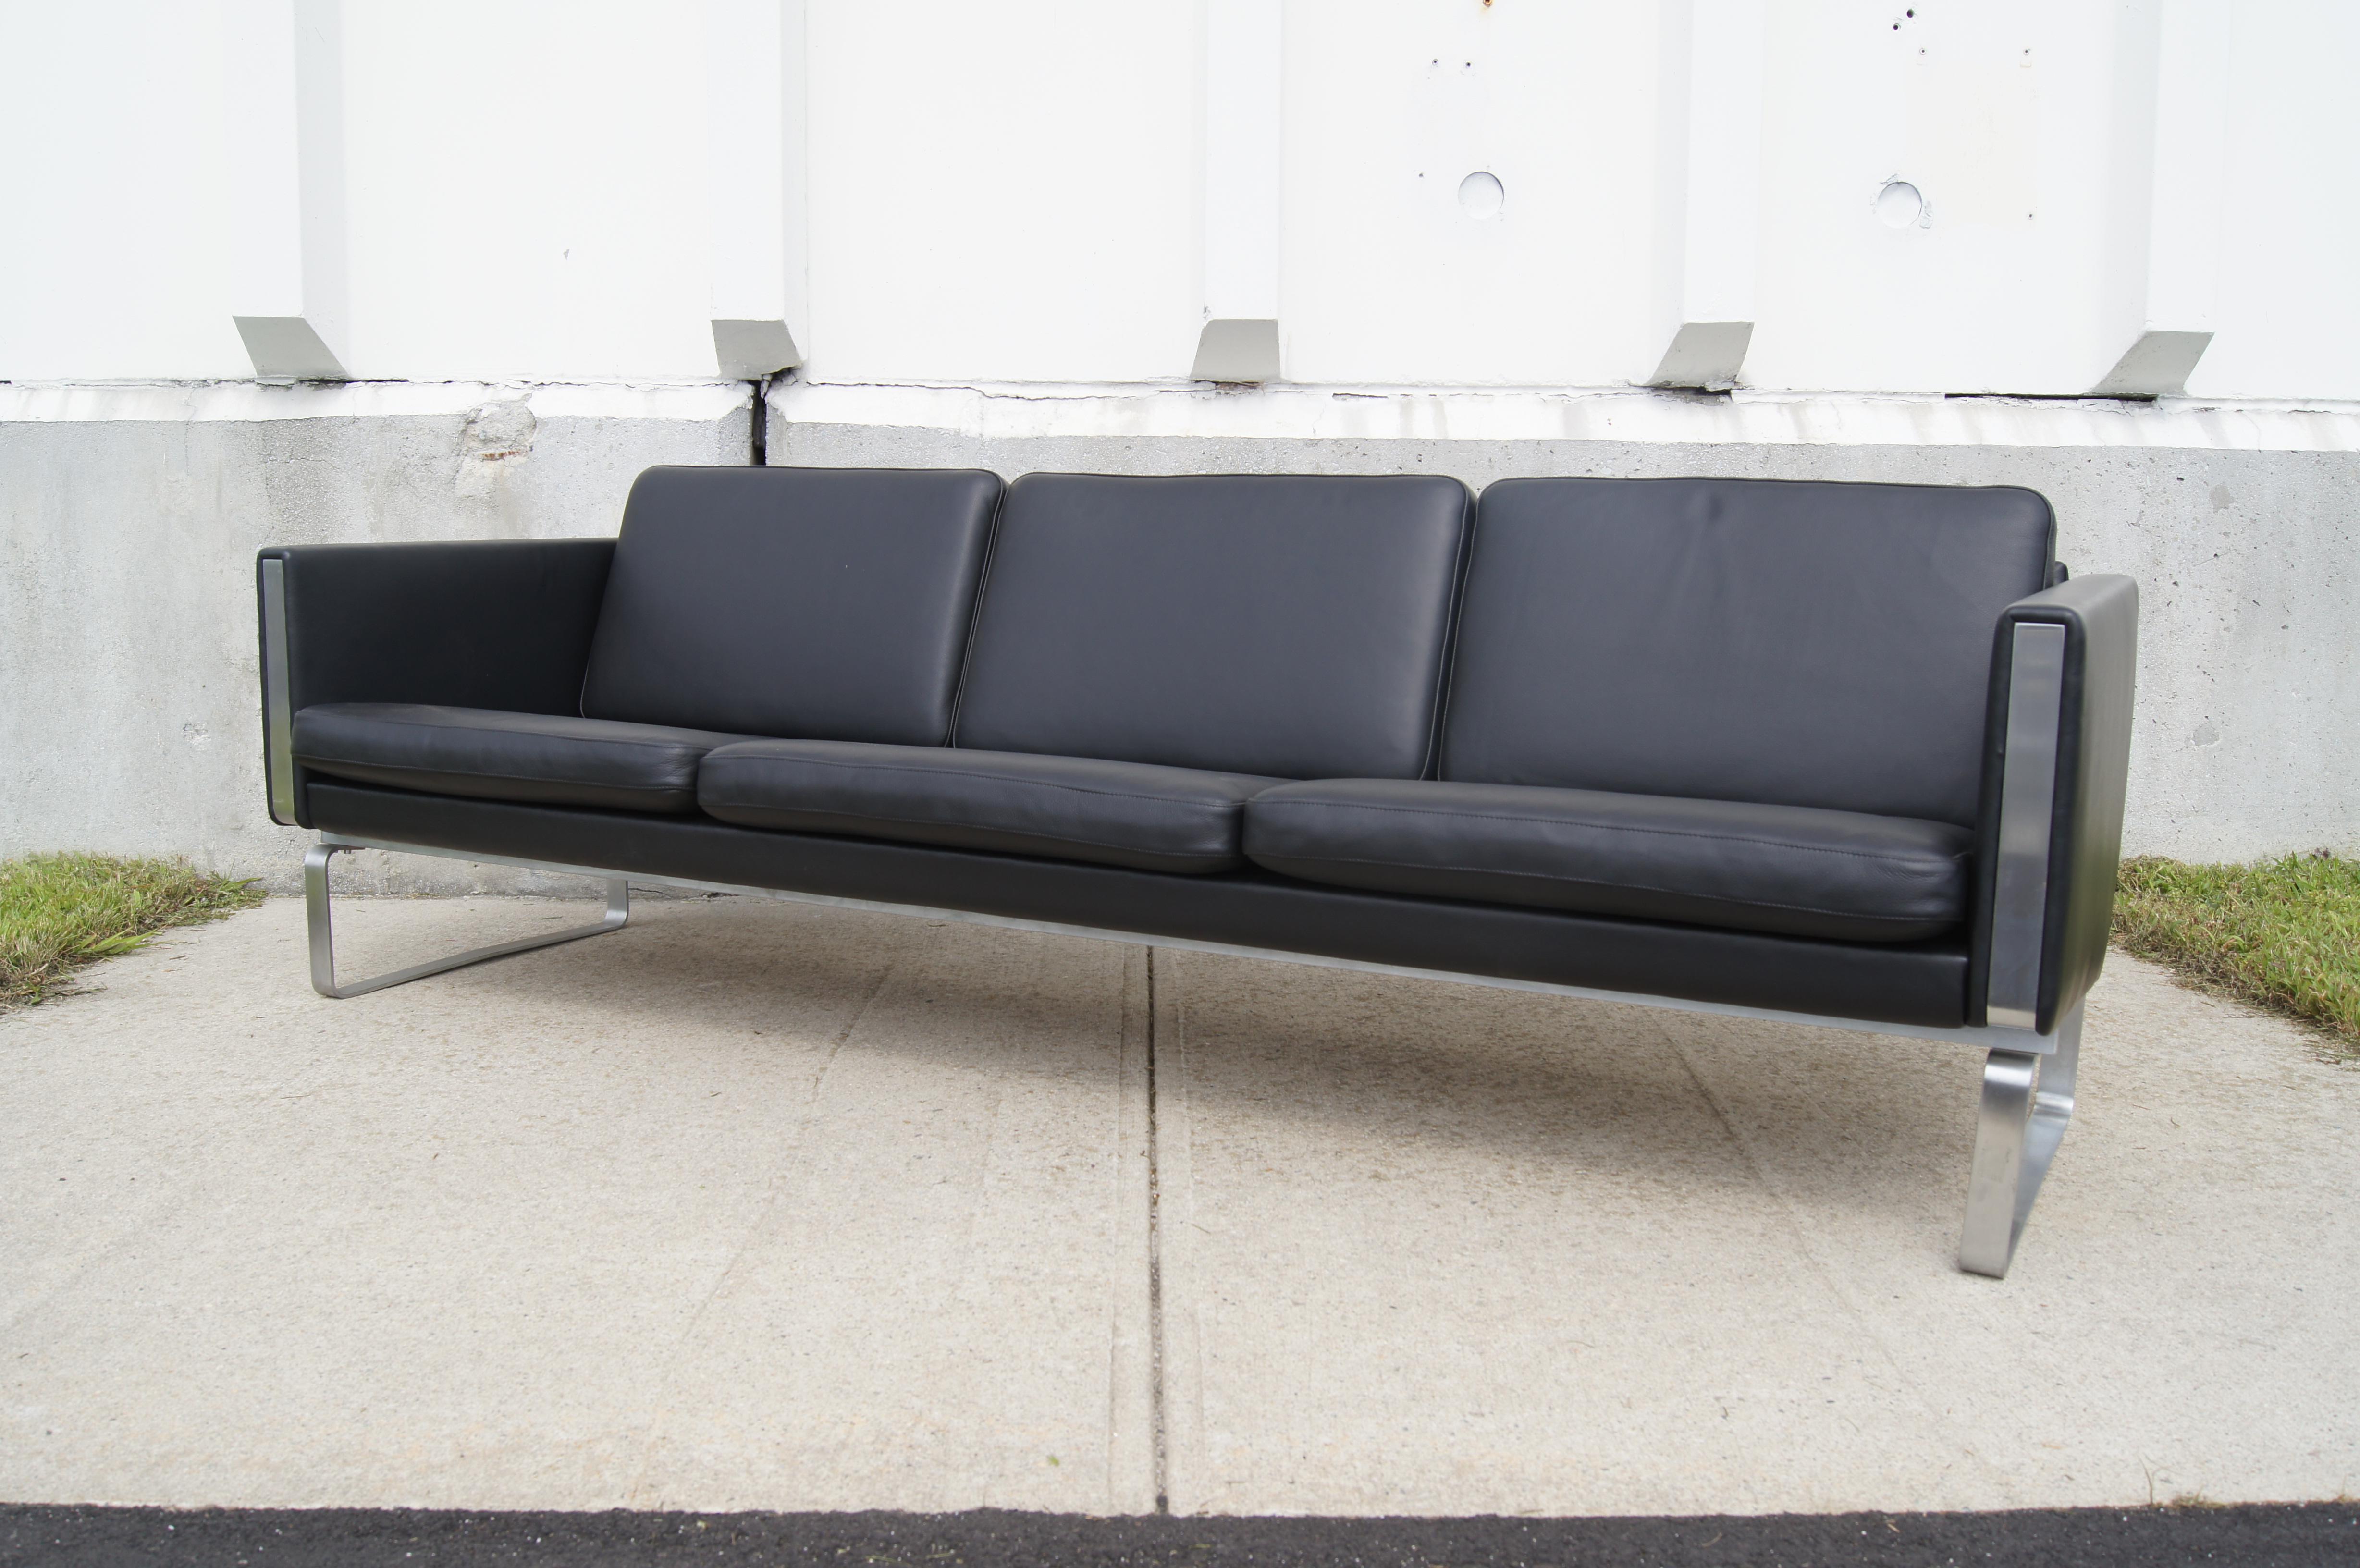 Designed by Hans Wegner in the early 1970s, this deeply comfortable sofa, in rich black leather, sits on a polished stainless steel base that carries through to the front and back of the upholstered armrests. 

This timeless three-seater sofa, model